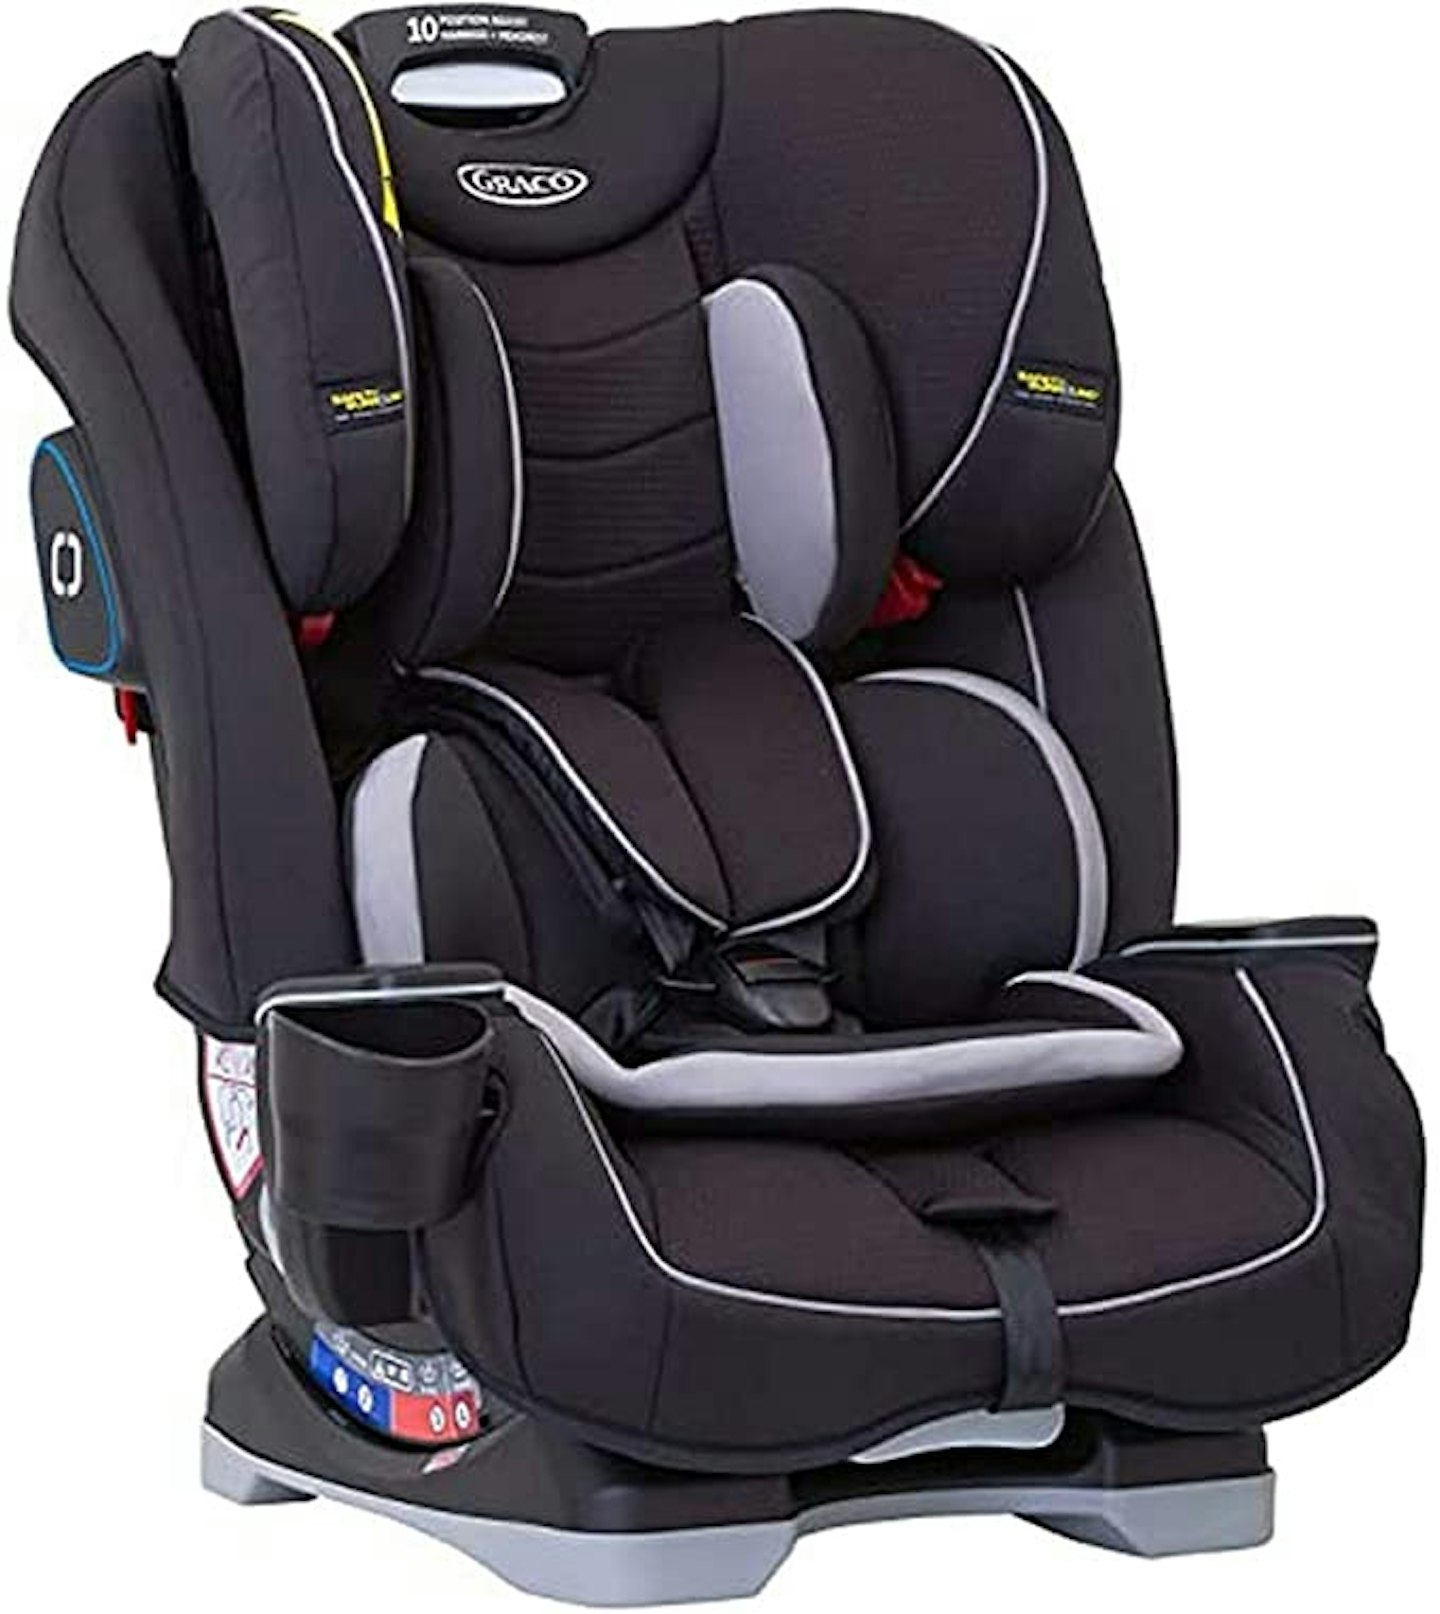 Graco Slimfit All-in-One Combination Car Seat